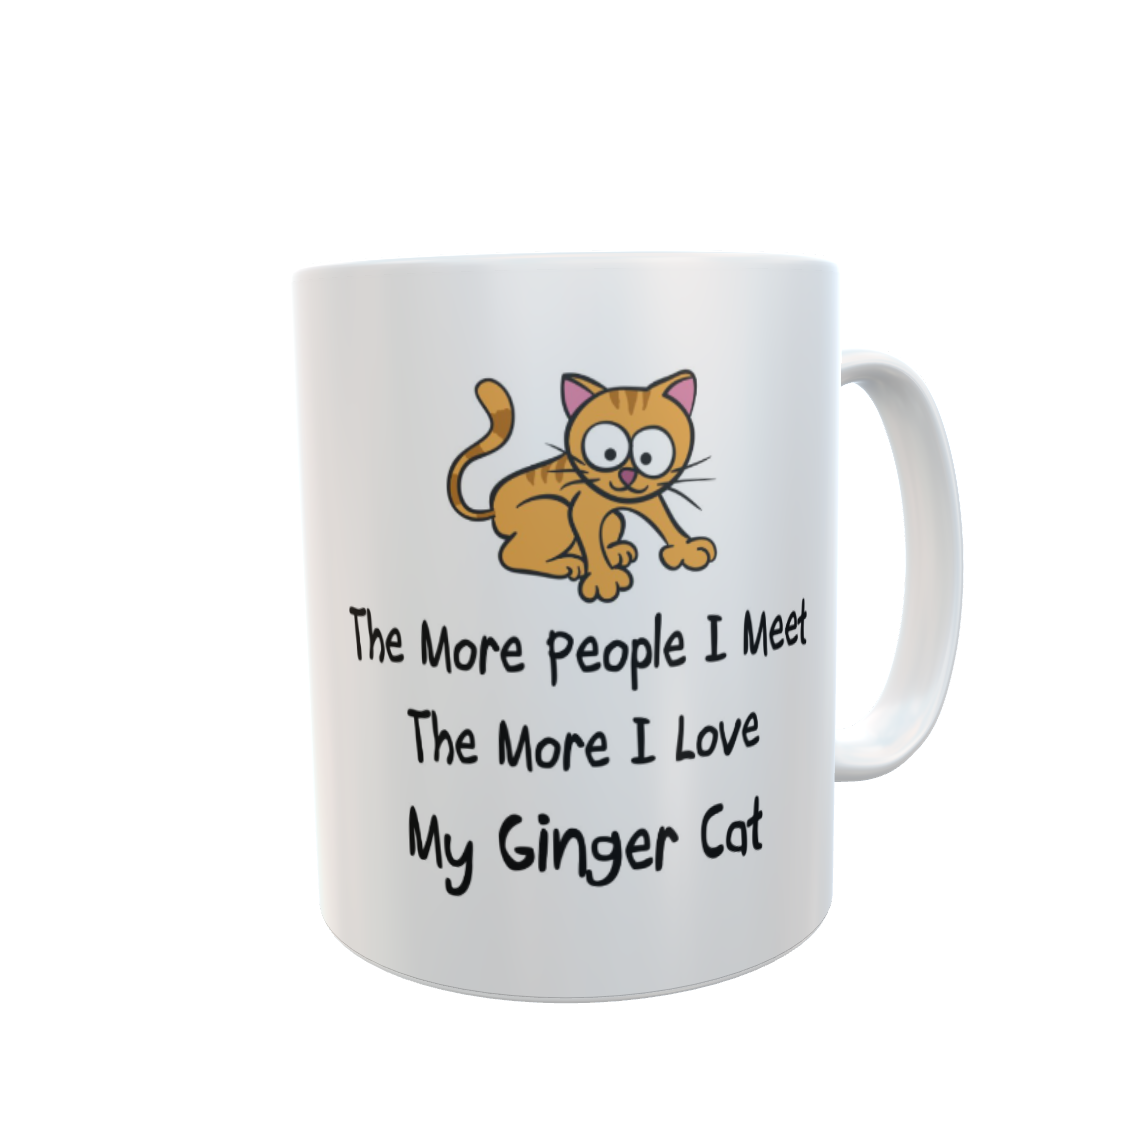 Ginger Cat Mug Gift - The More People I Meet The More I Love My - Cute Novelty Pet Owner Lover Cup Present